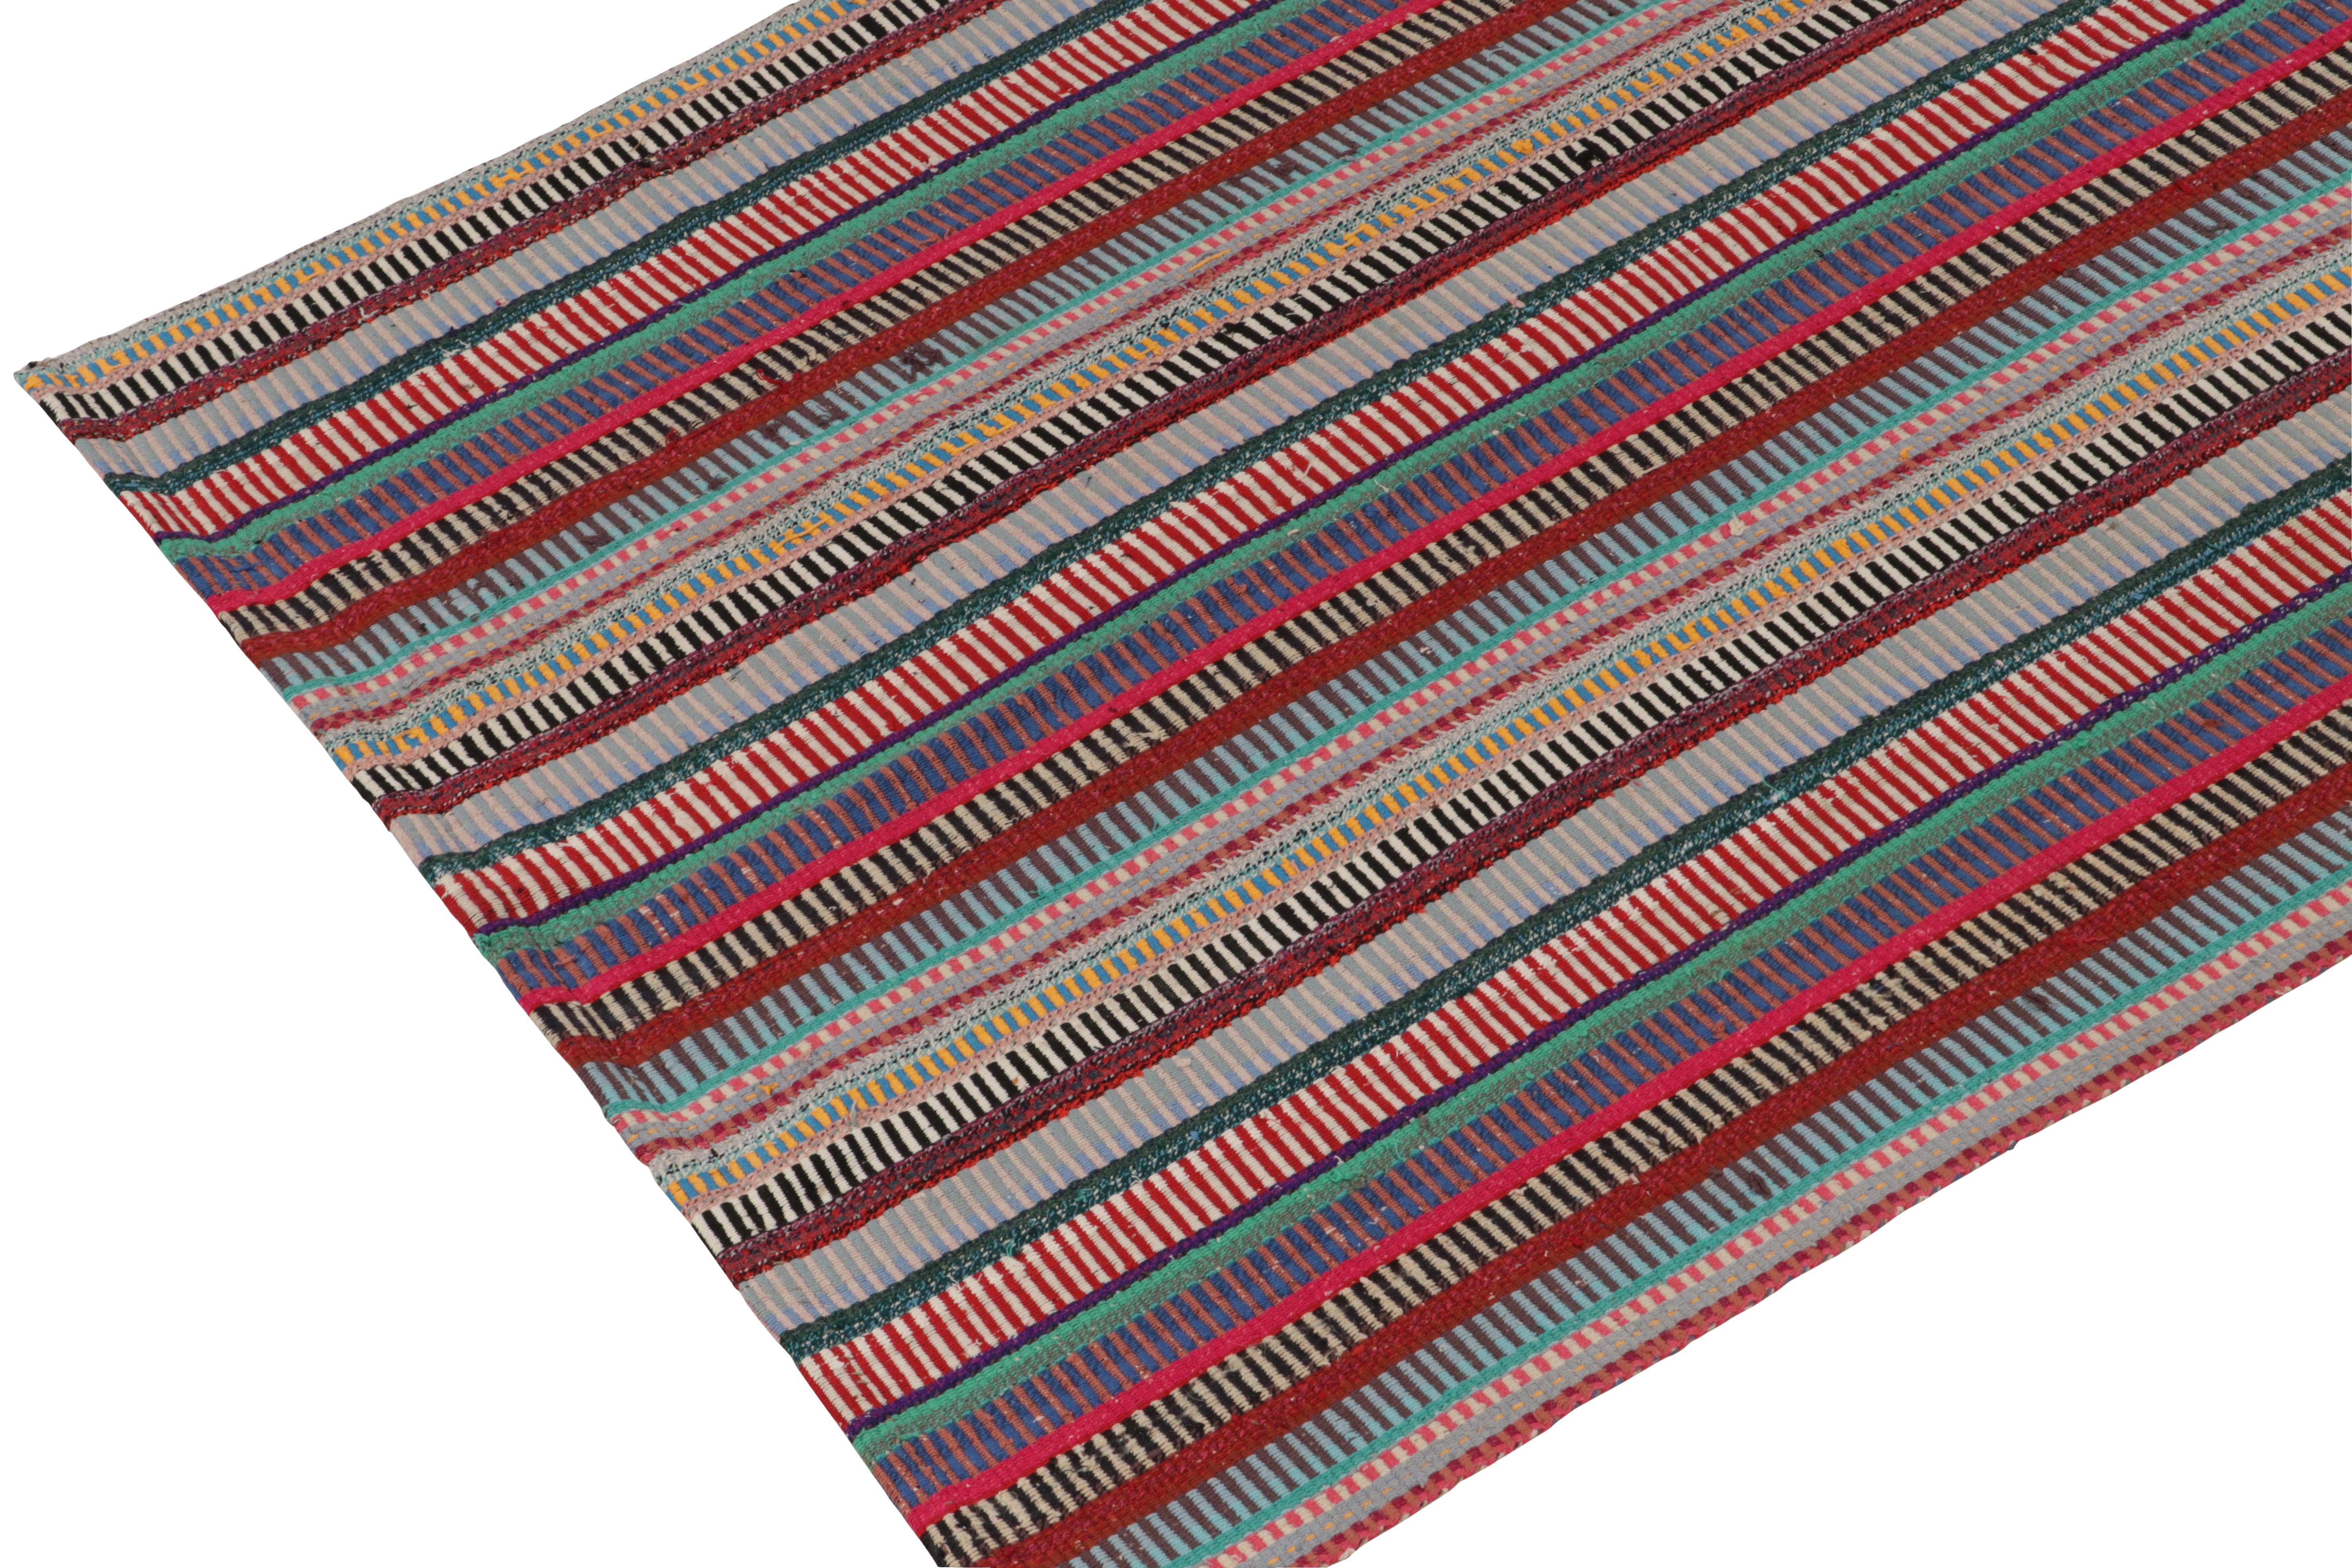 1950s Vintage Chaput Kilim Rug in Stripes, Multicolor Patterns by Rug & Kilim In Good Condition For Sale In Long Island City, NY